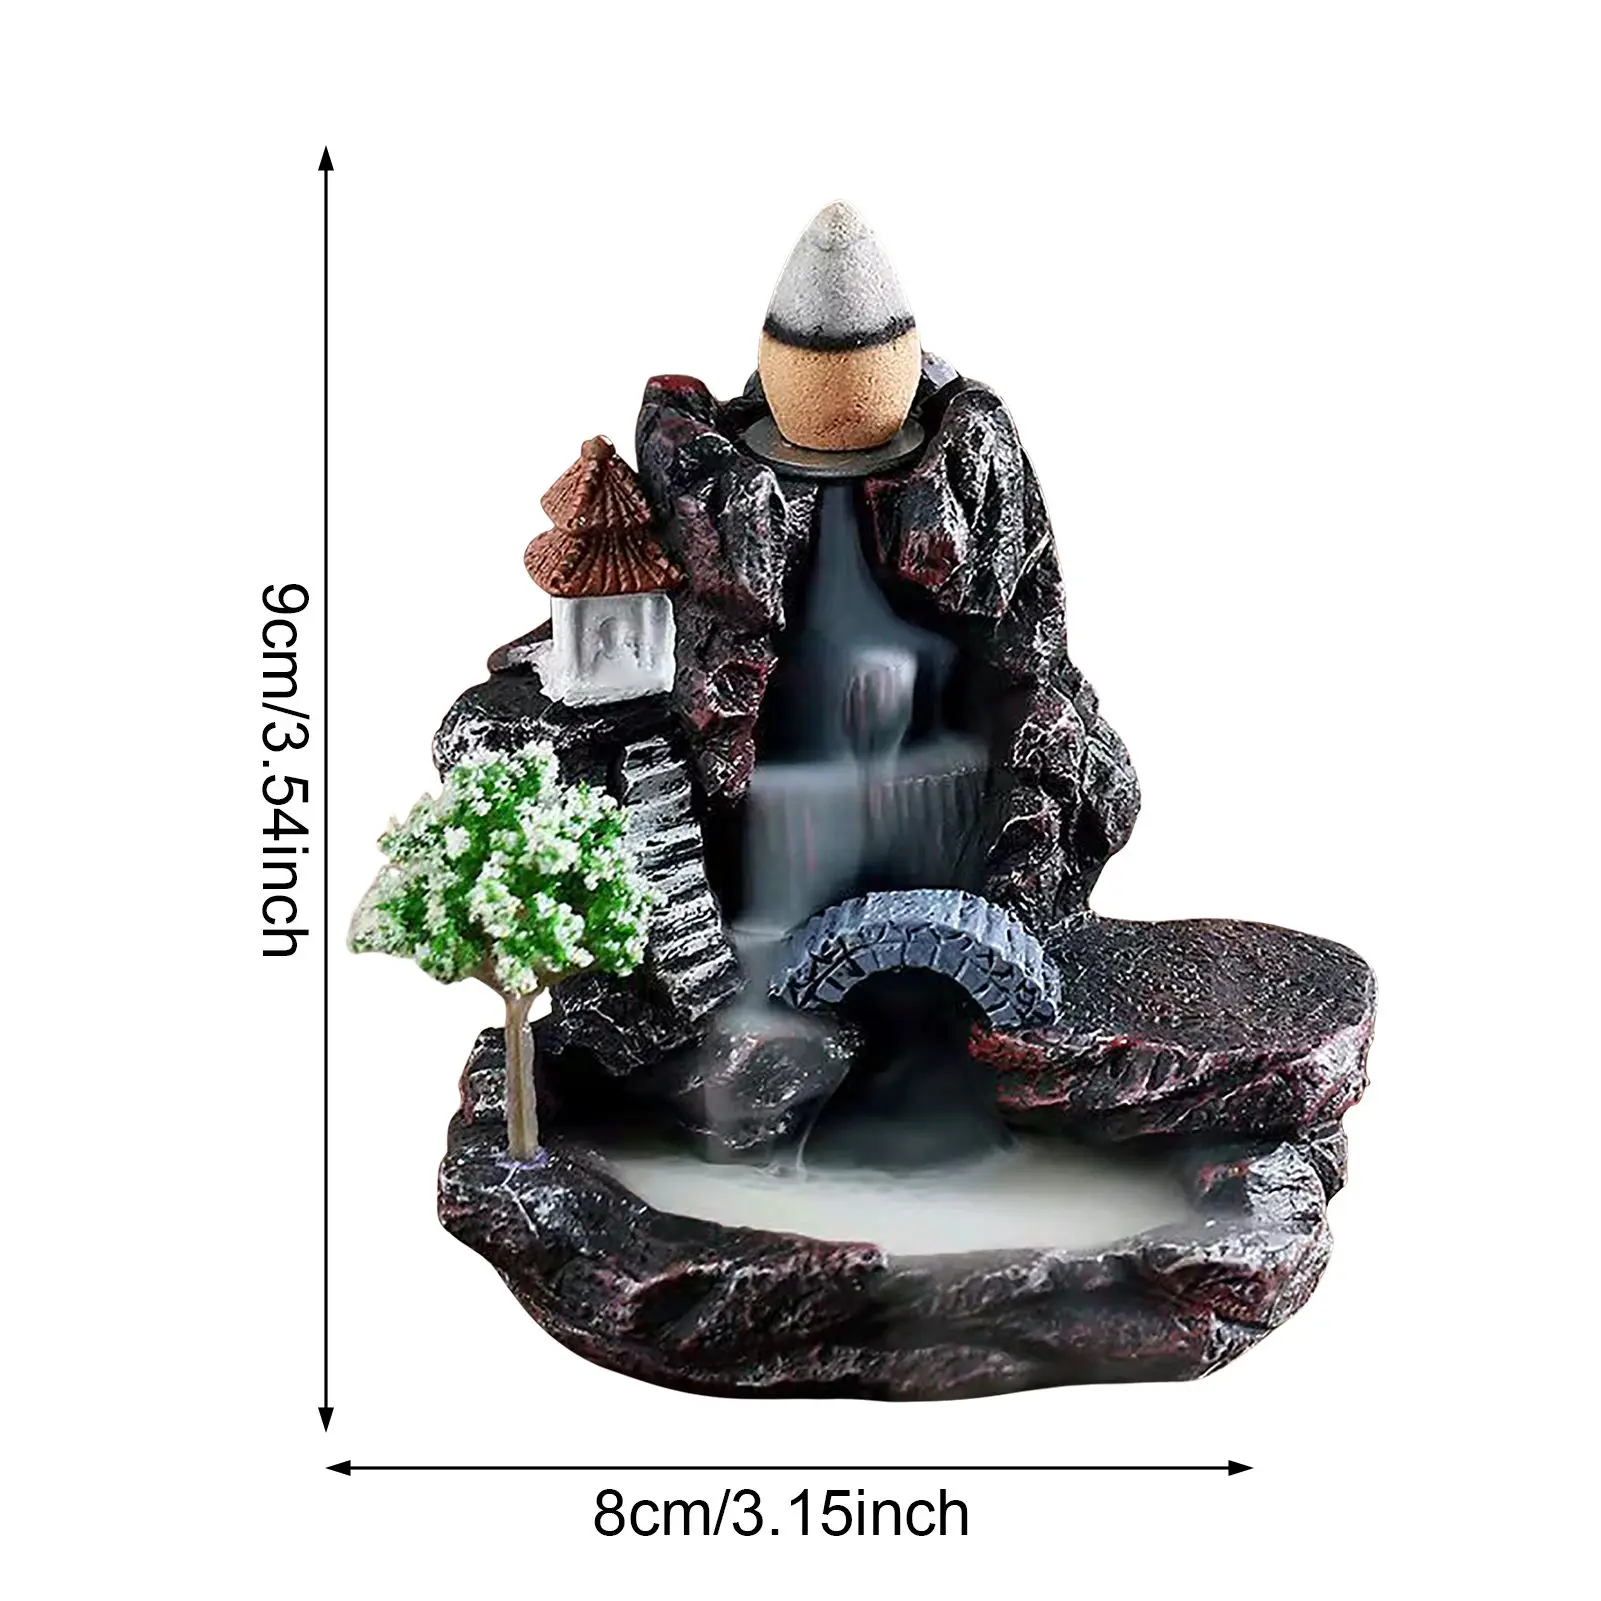 Waterfall Incense Burner Ceramic Backflow Incense Holder Fountain Backflow Incense Cones For Home Office Decor Housewarming Gift images - 6